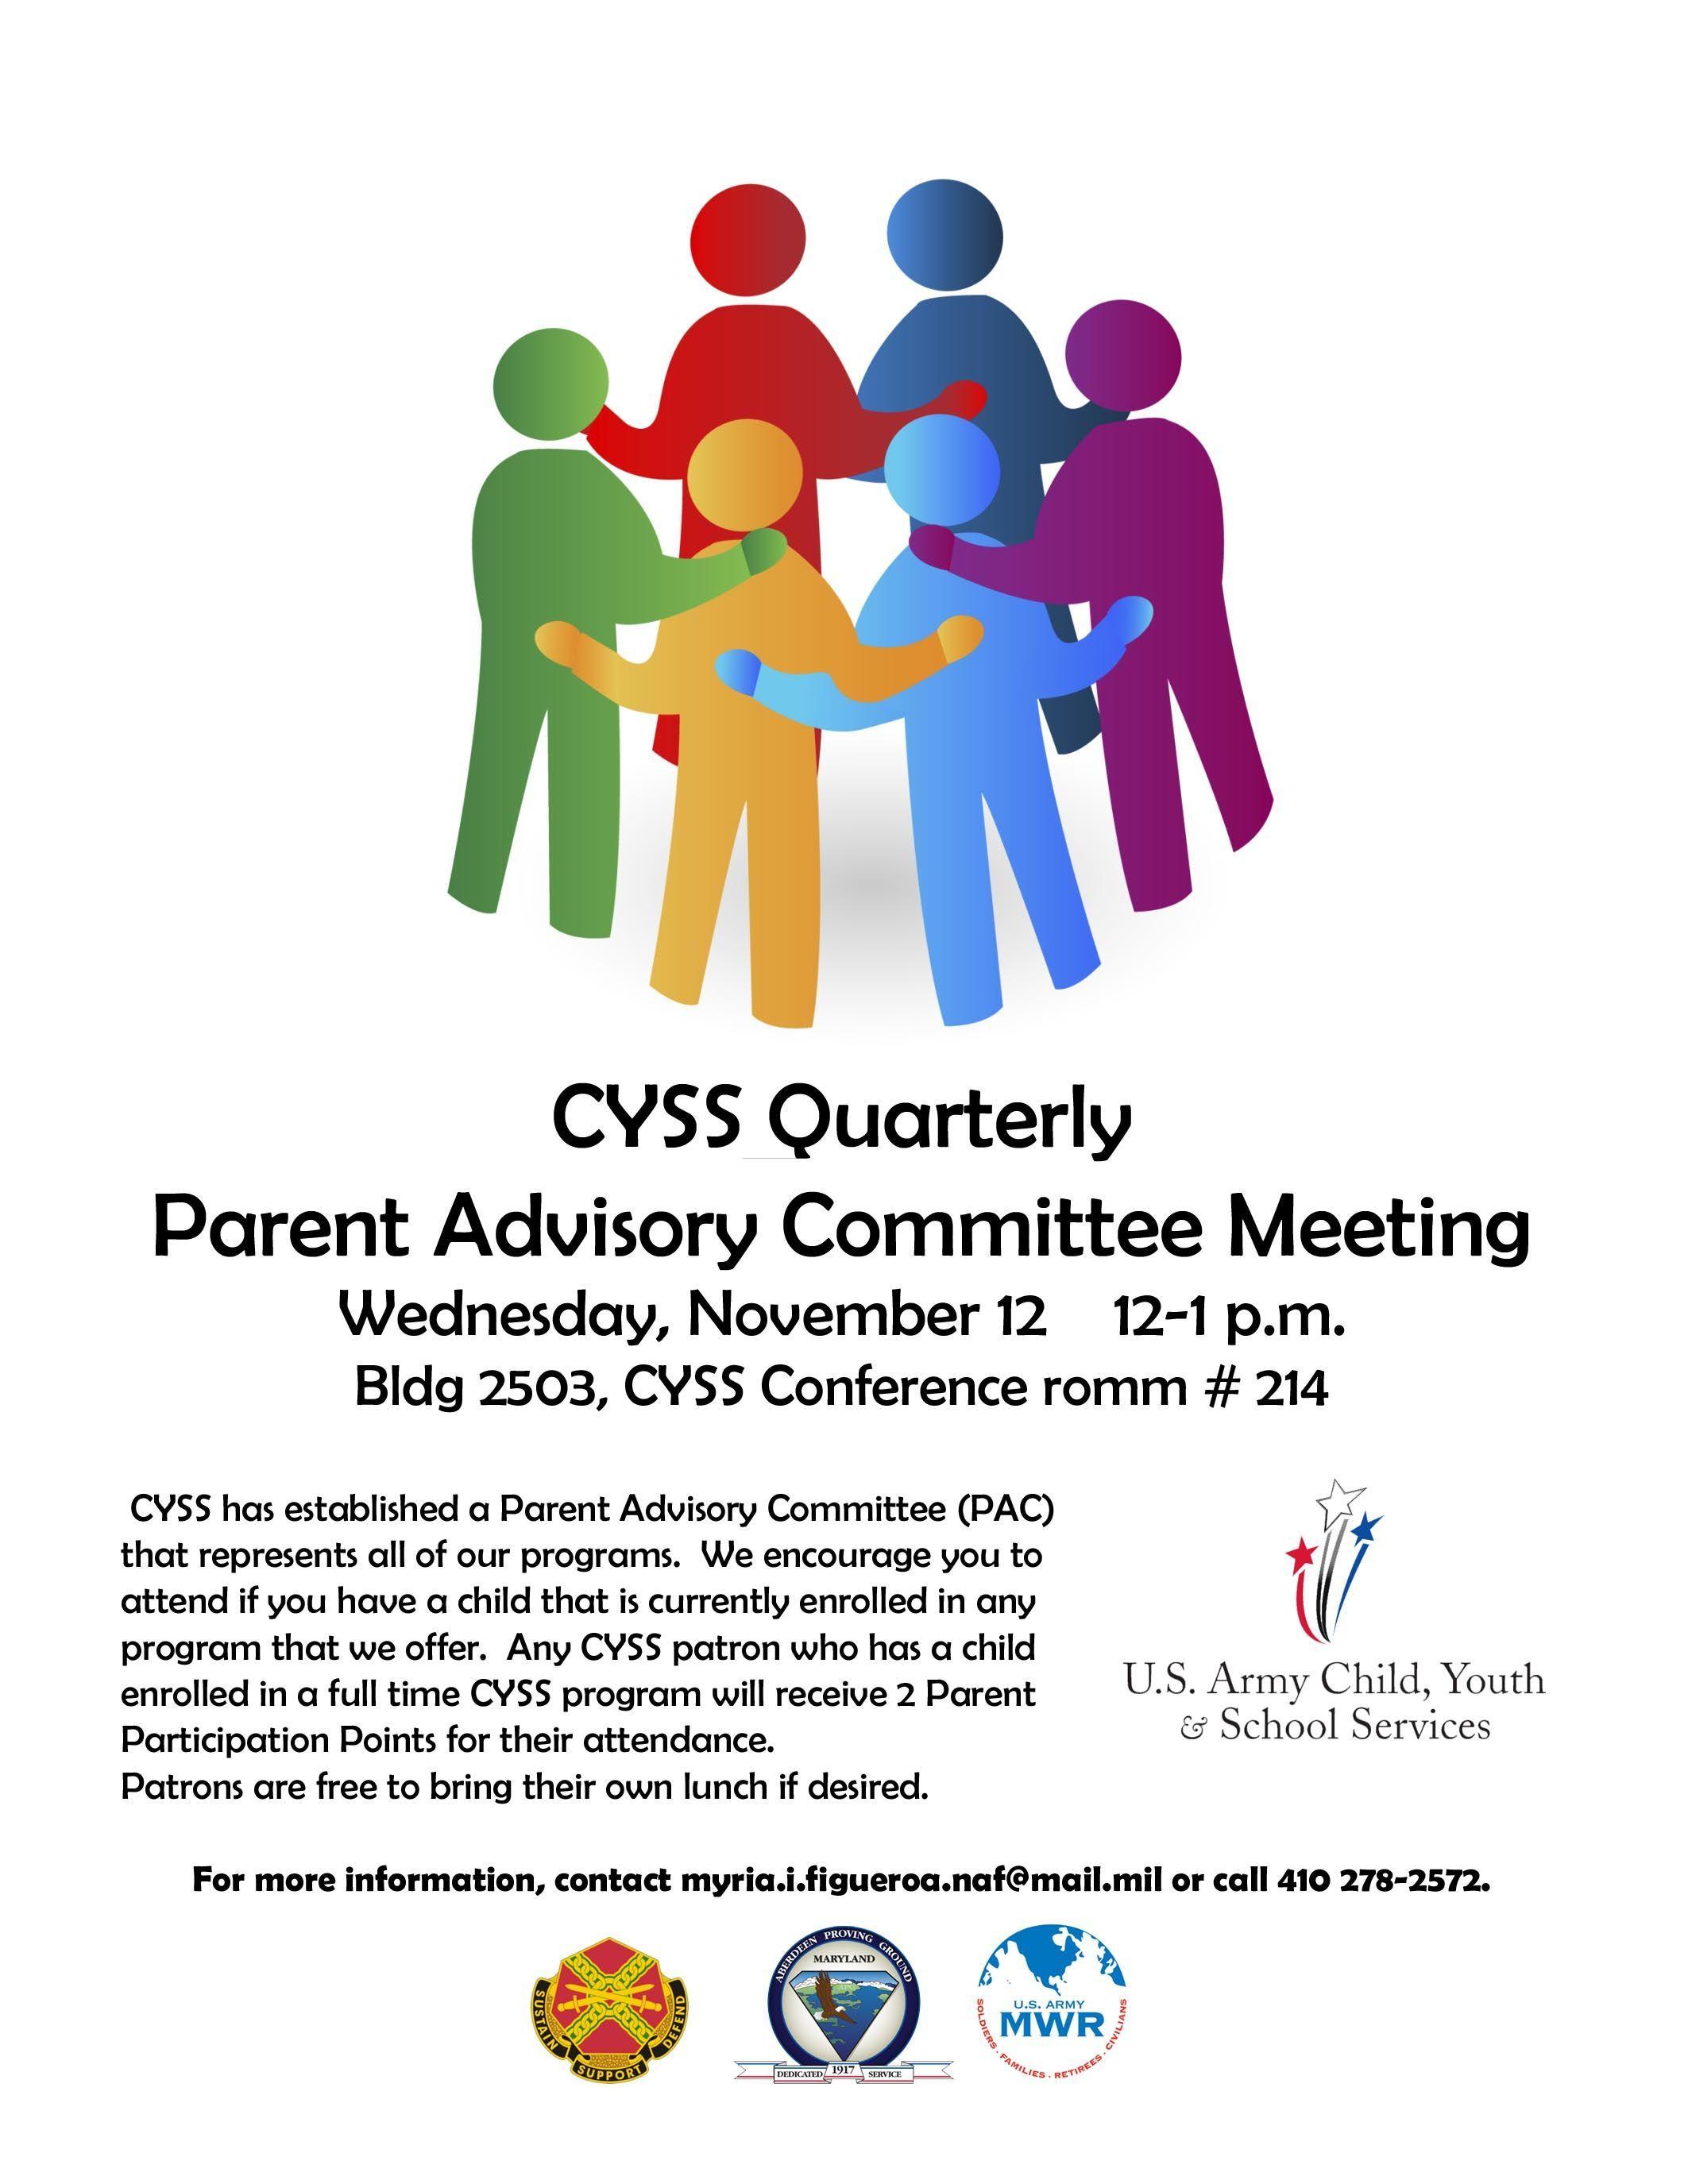 CYSS Logo - CYSS Parent Advisory Committee Meeting New date and time: Wed Nov 12 ...